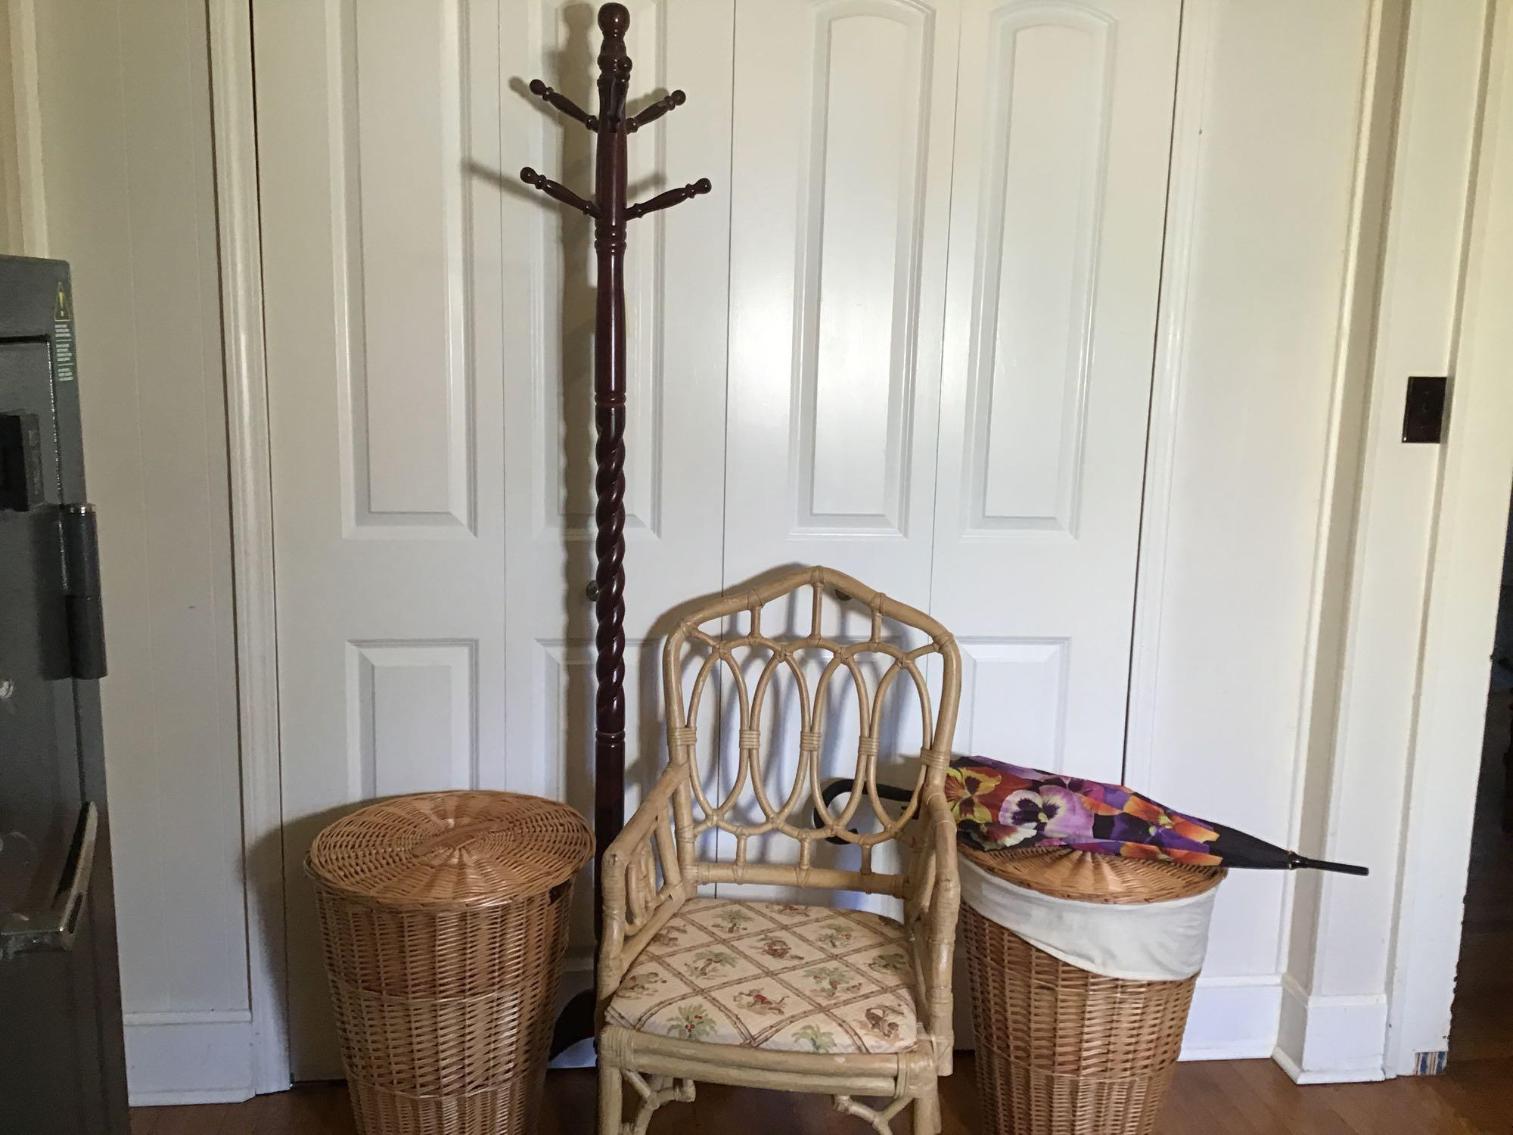 Image for Rattan Chair, Coat rack, and Baskets